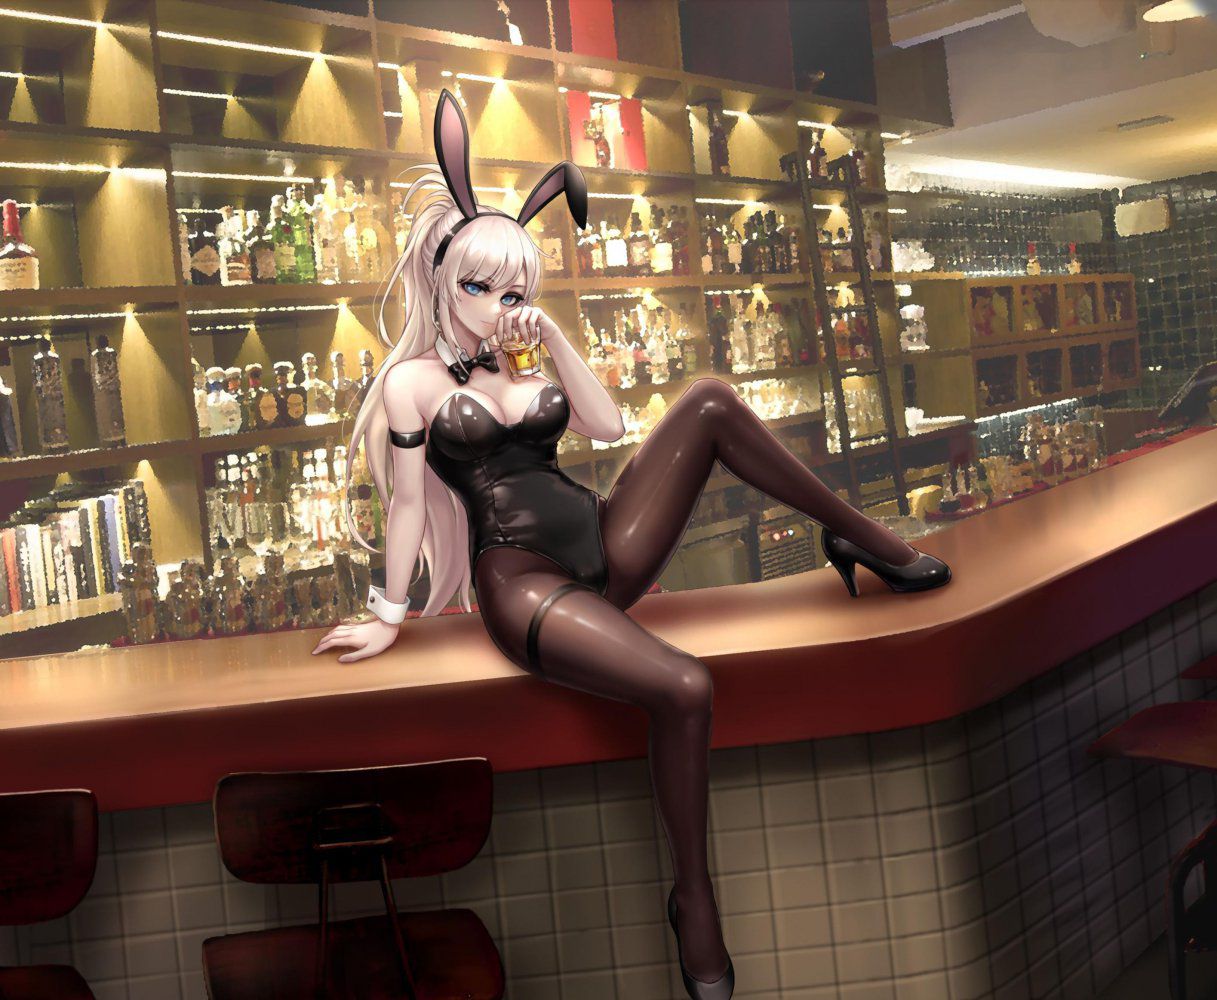 【Secondary】Bunny Girl 【Image】 Part 5 2